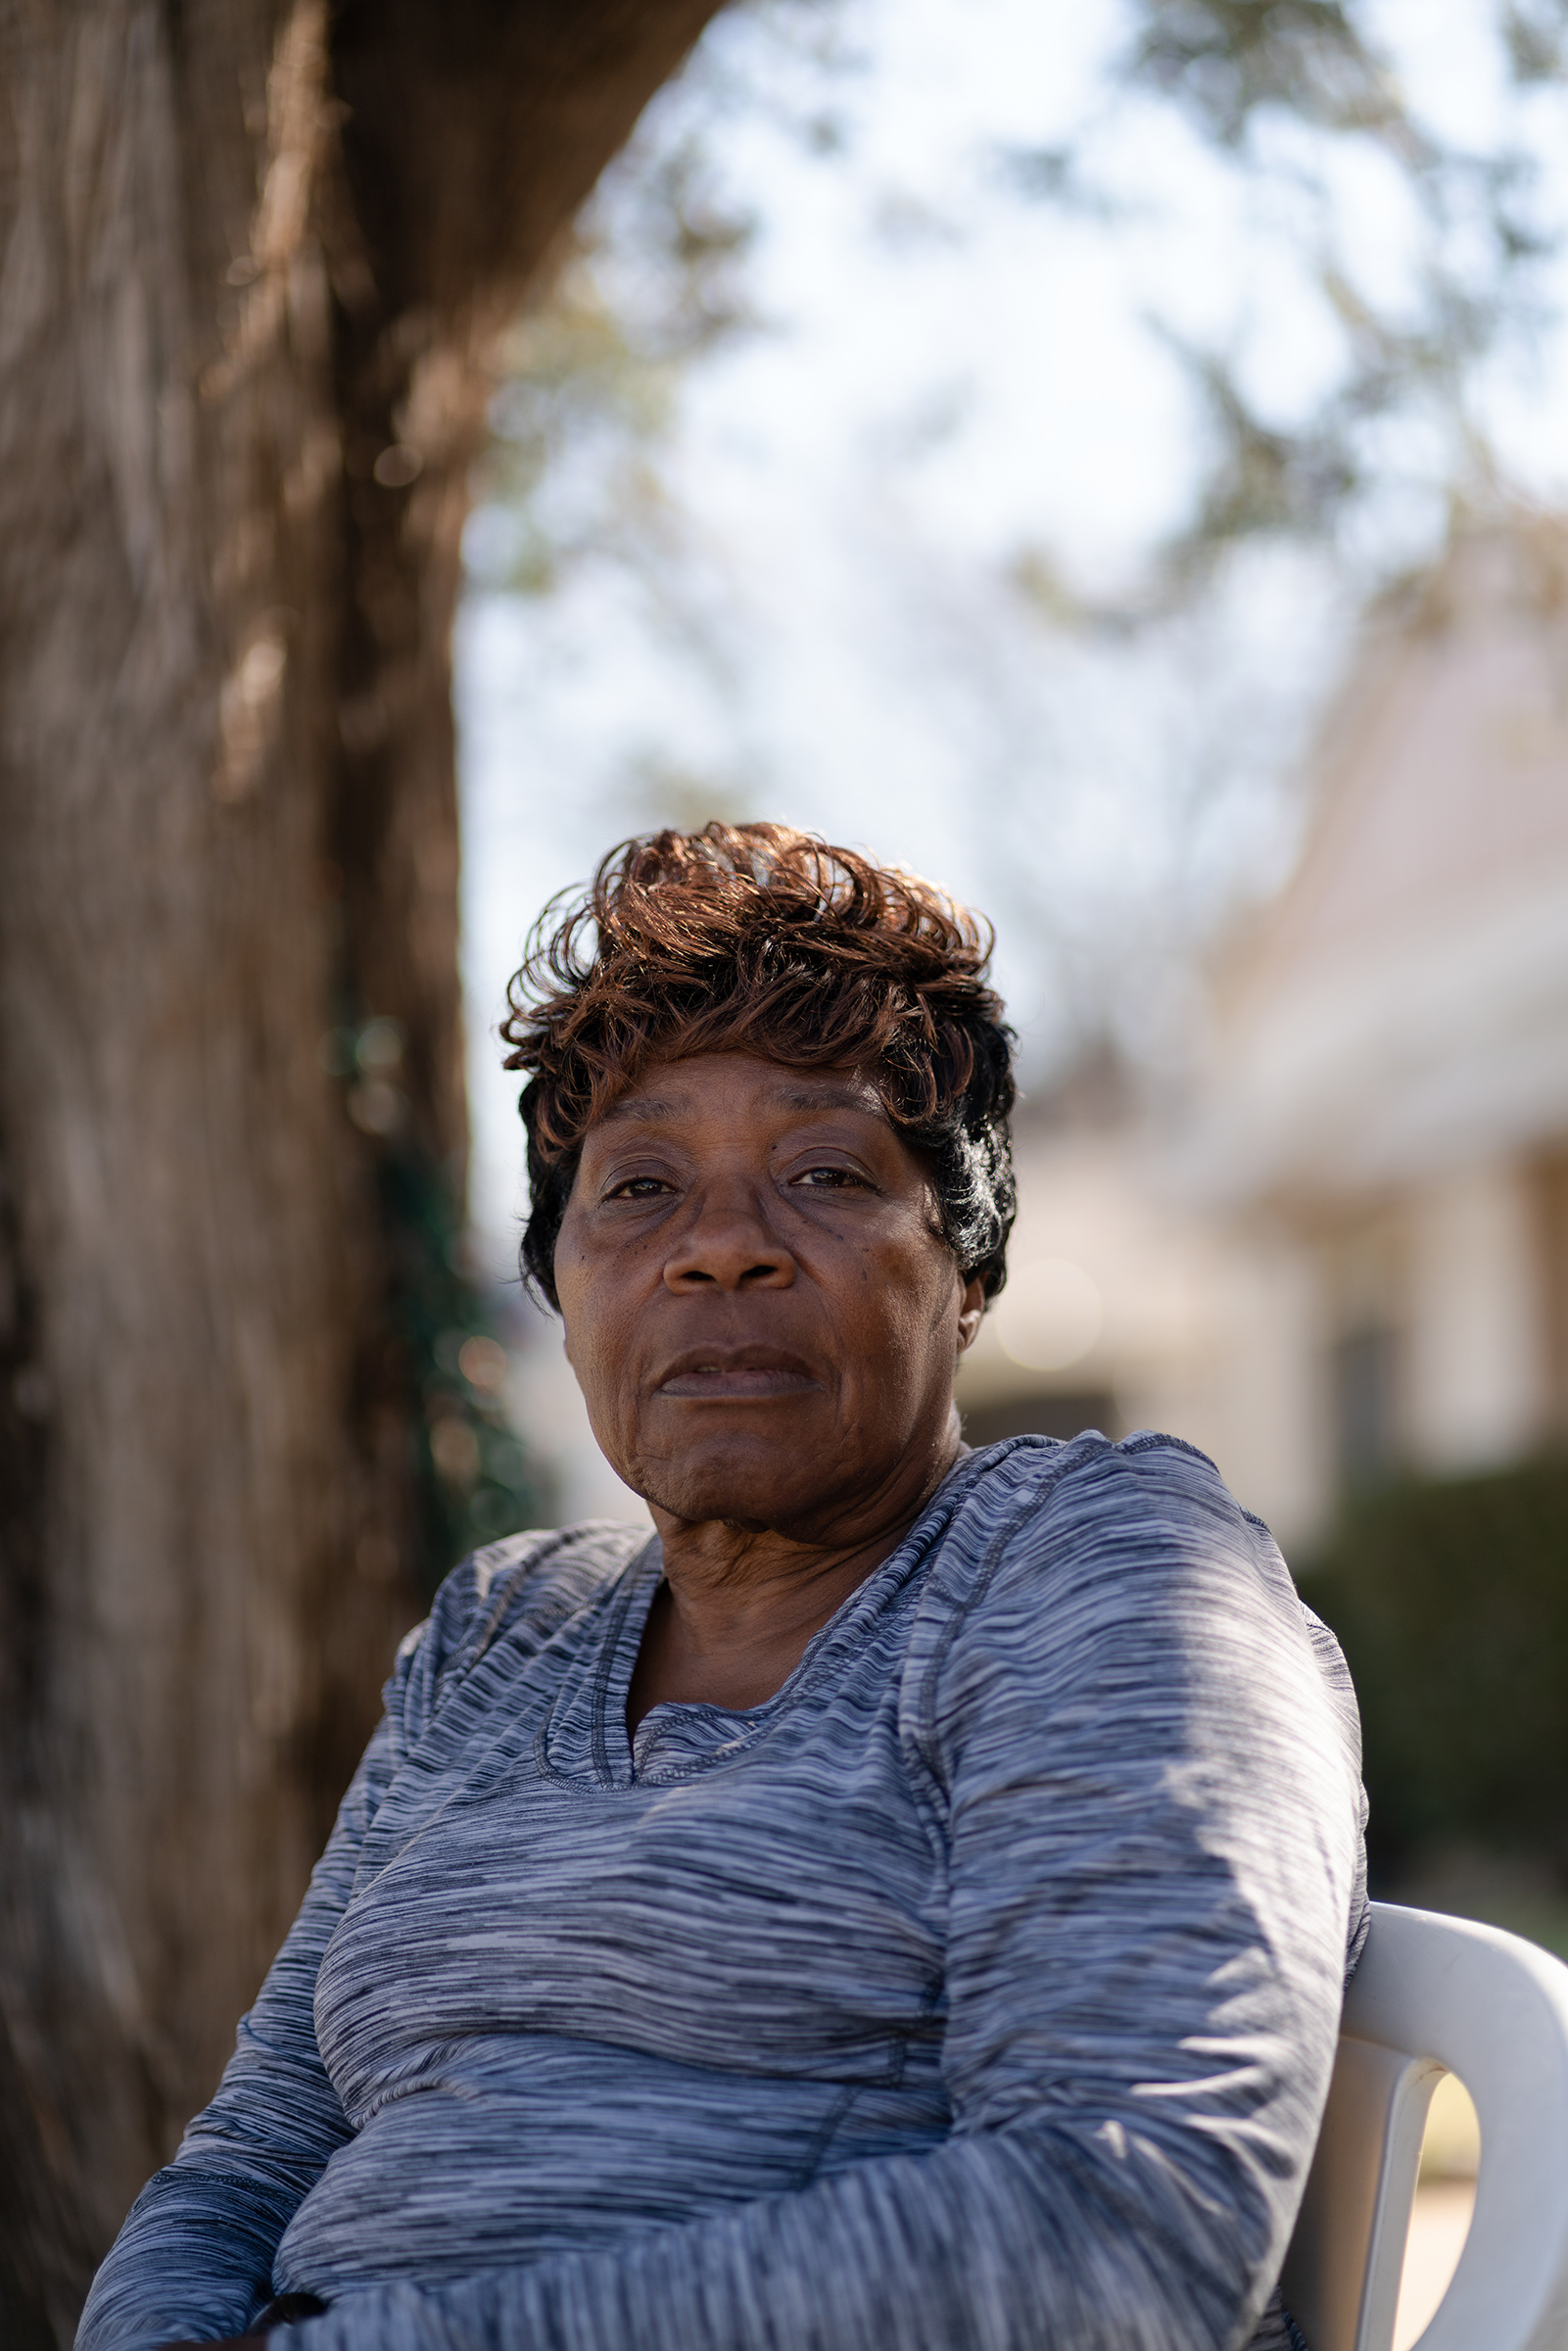 Almeree Jones outside her home in Dallas' Ideal neighborhood on Feb. 24. (Zerb Mellish for TIME)